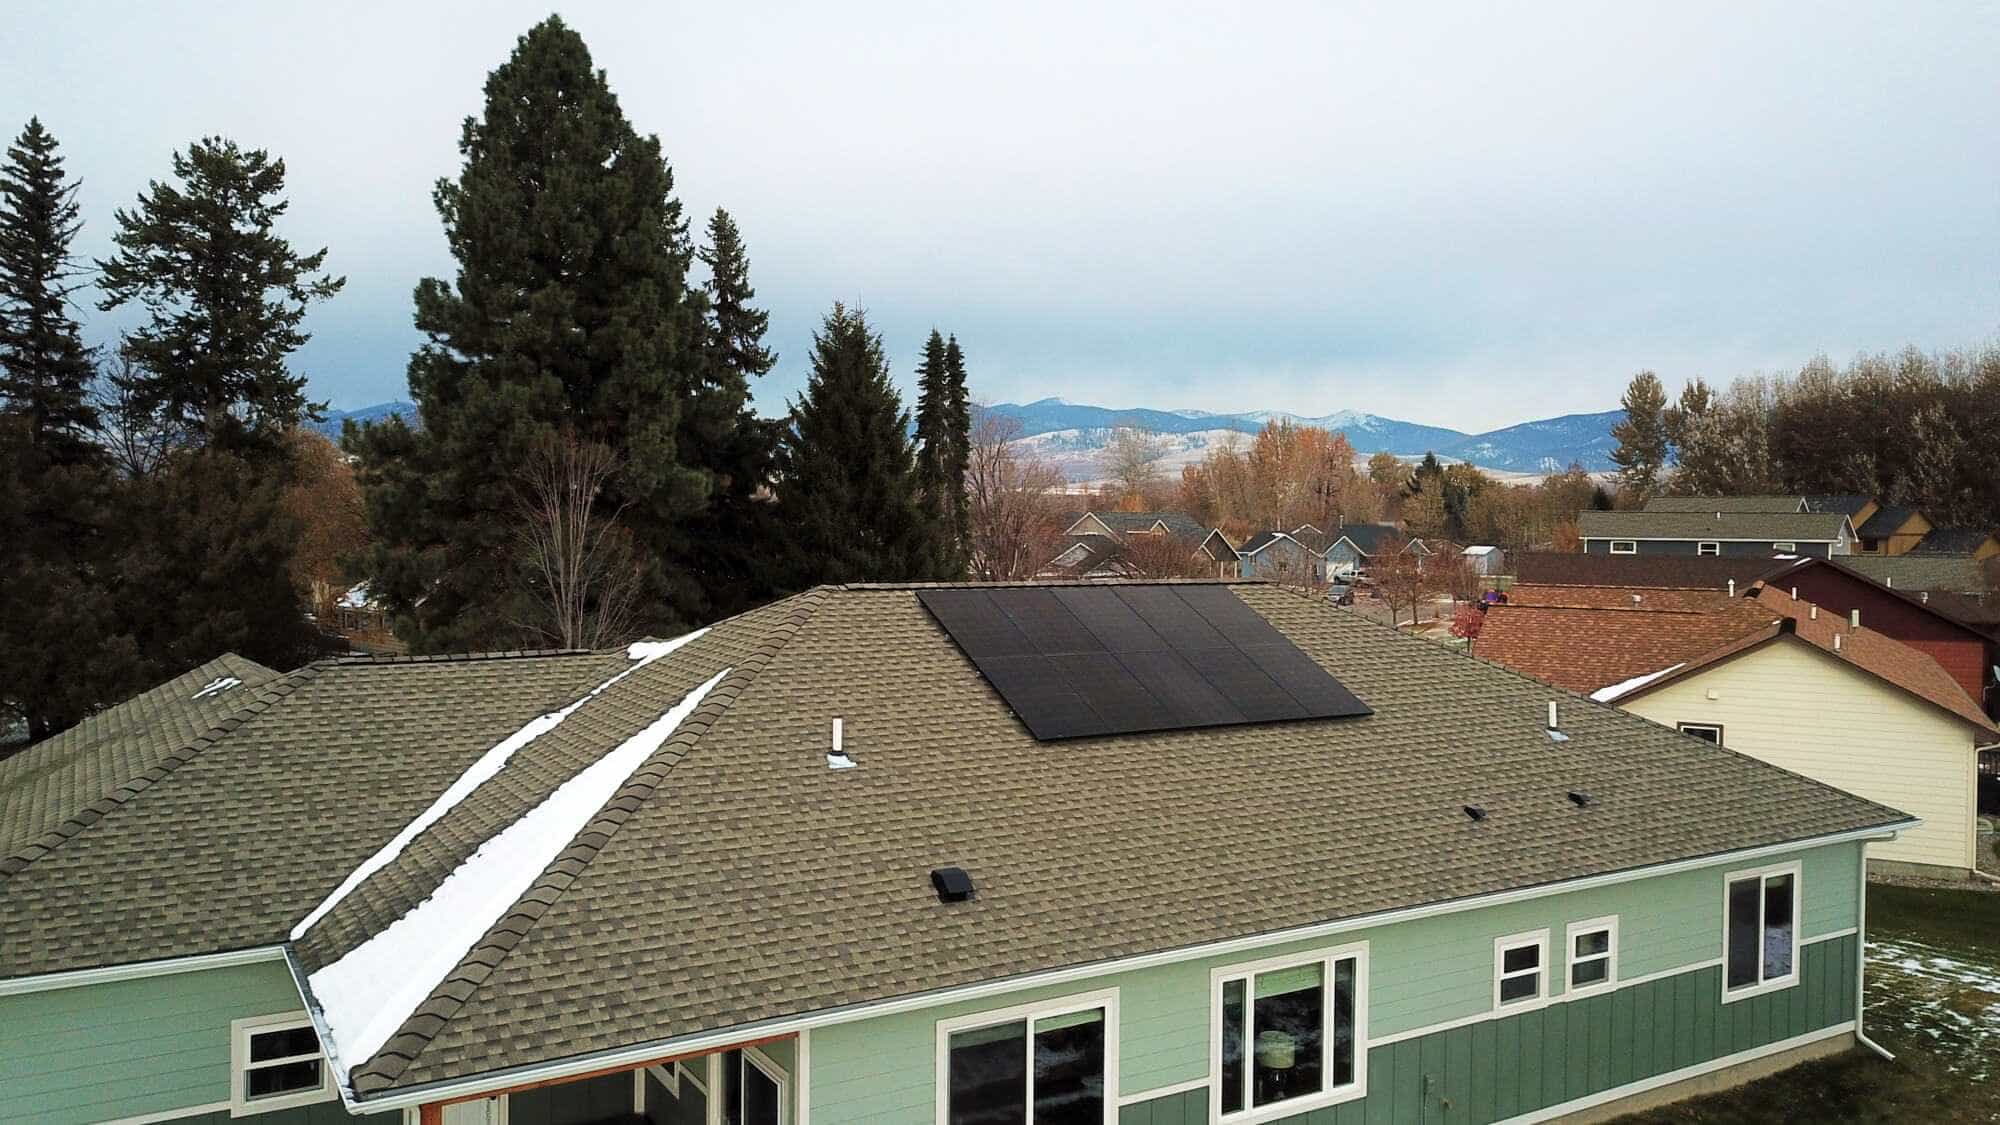 Solar panels on a roof in Missoula